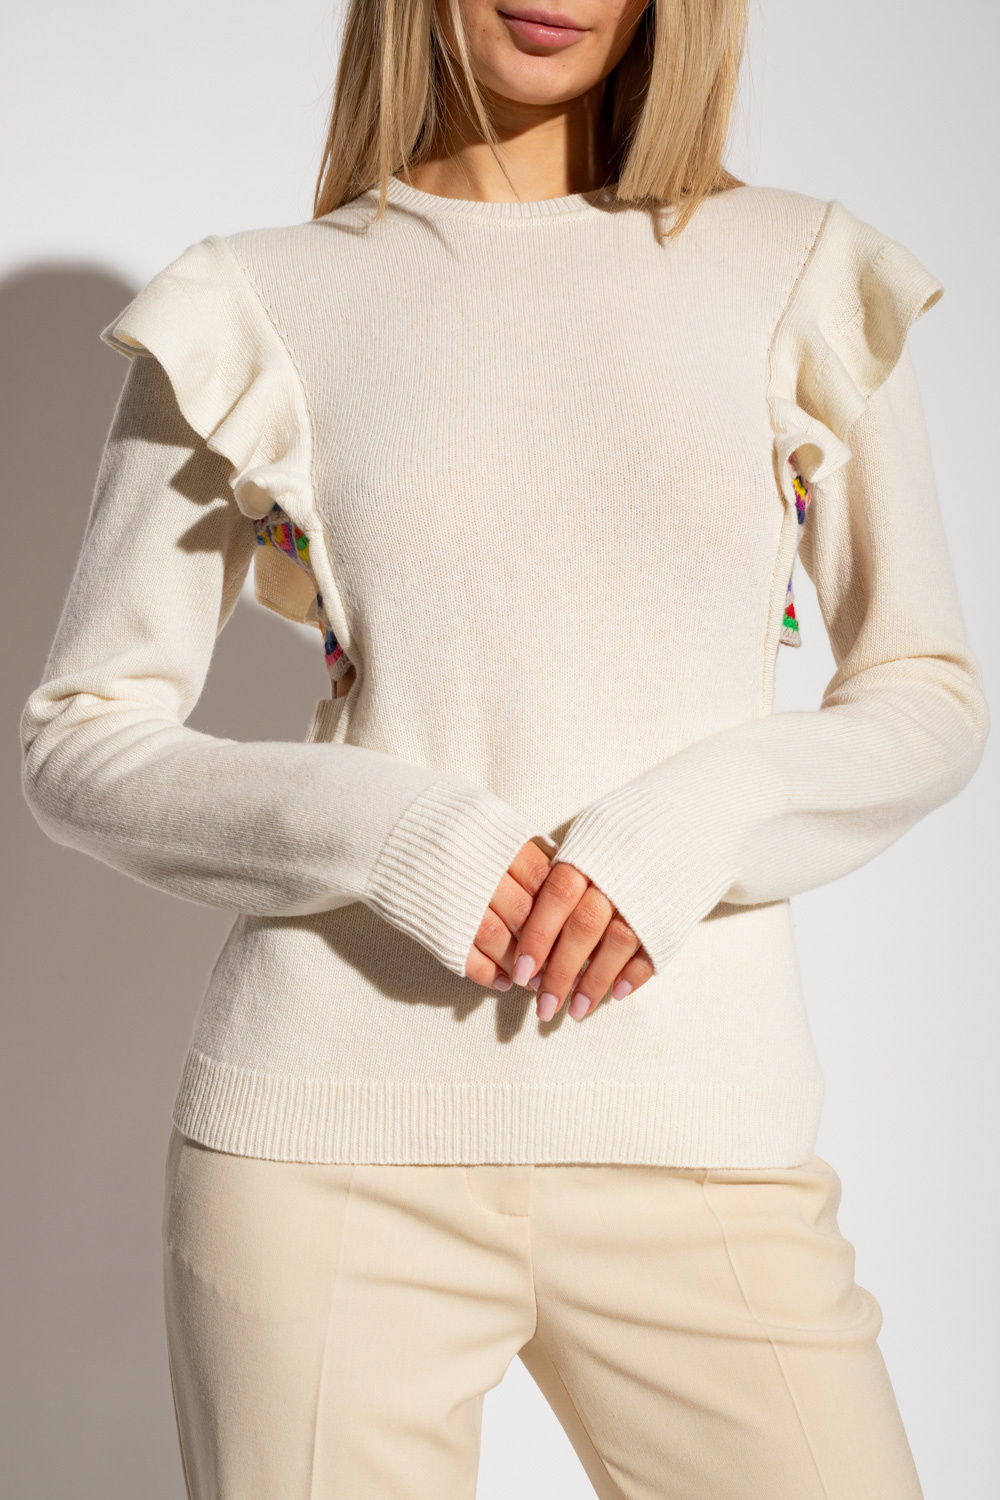 Chloé Sweater with ruffles